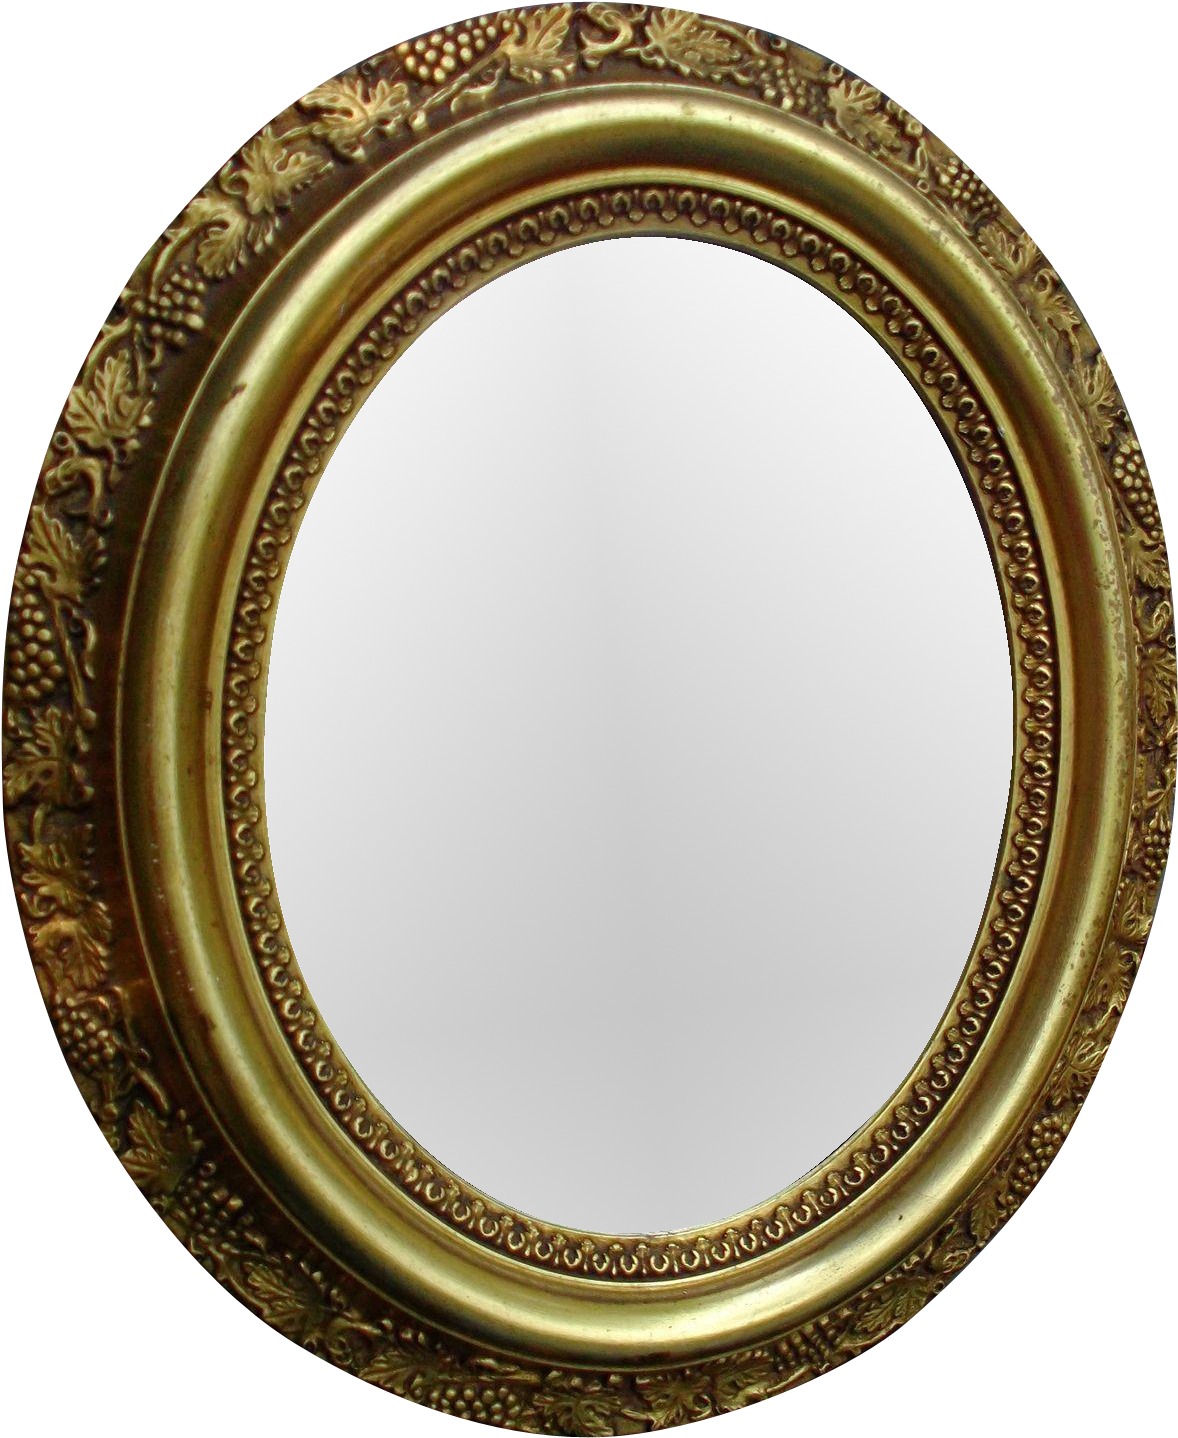 A Gold Frame With A White Mirror